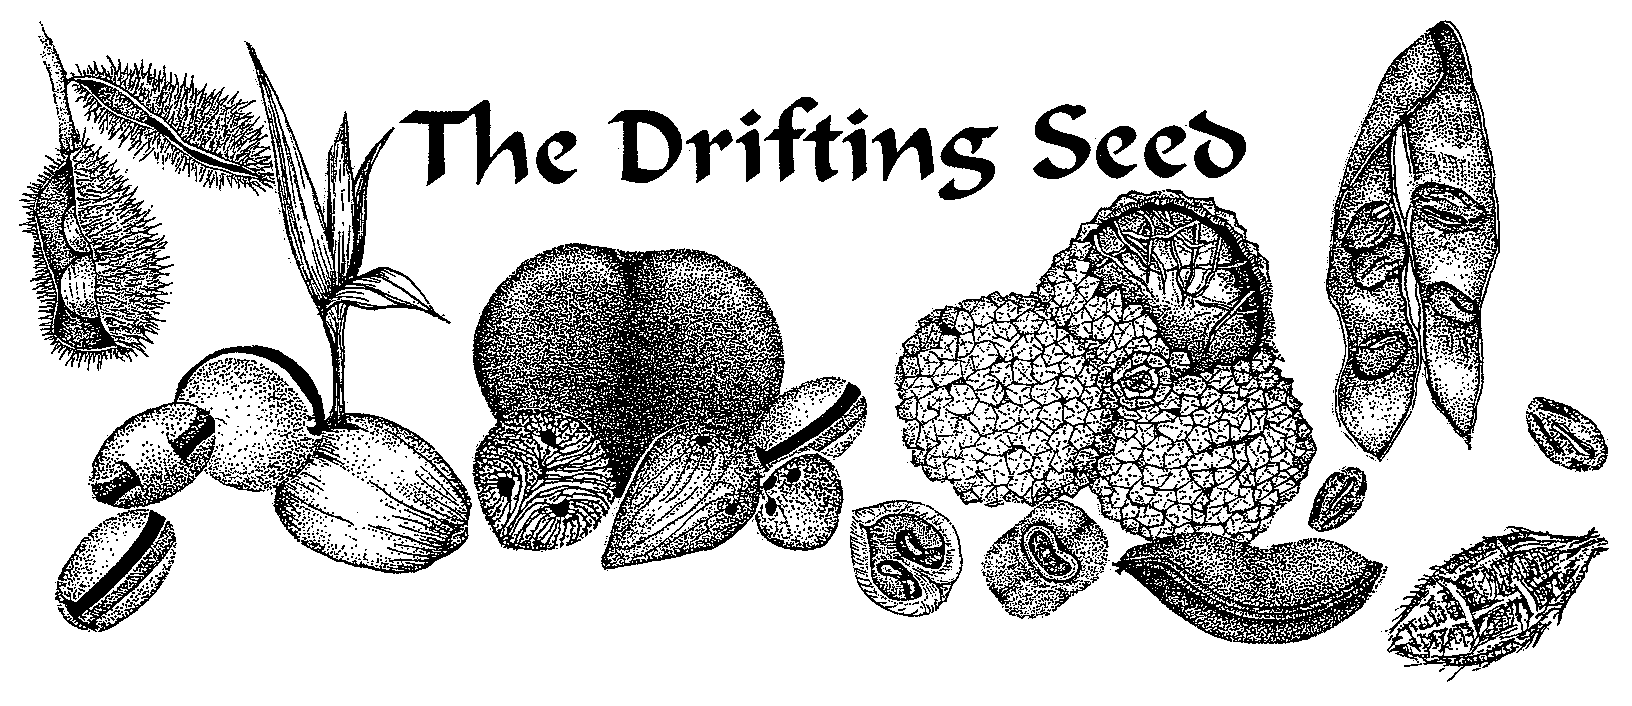 The Drifting Seed